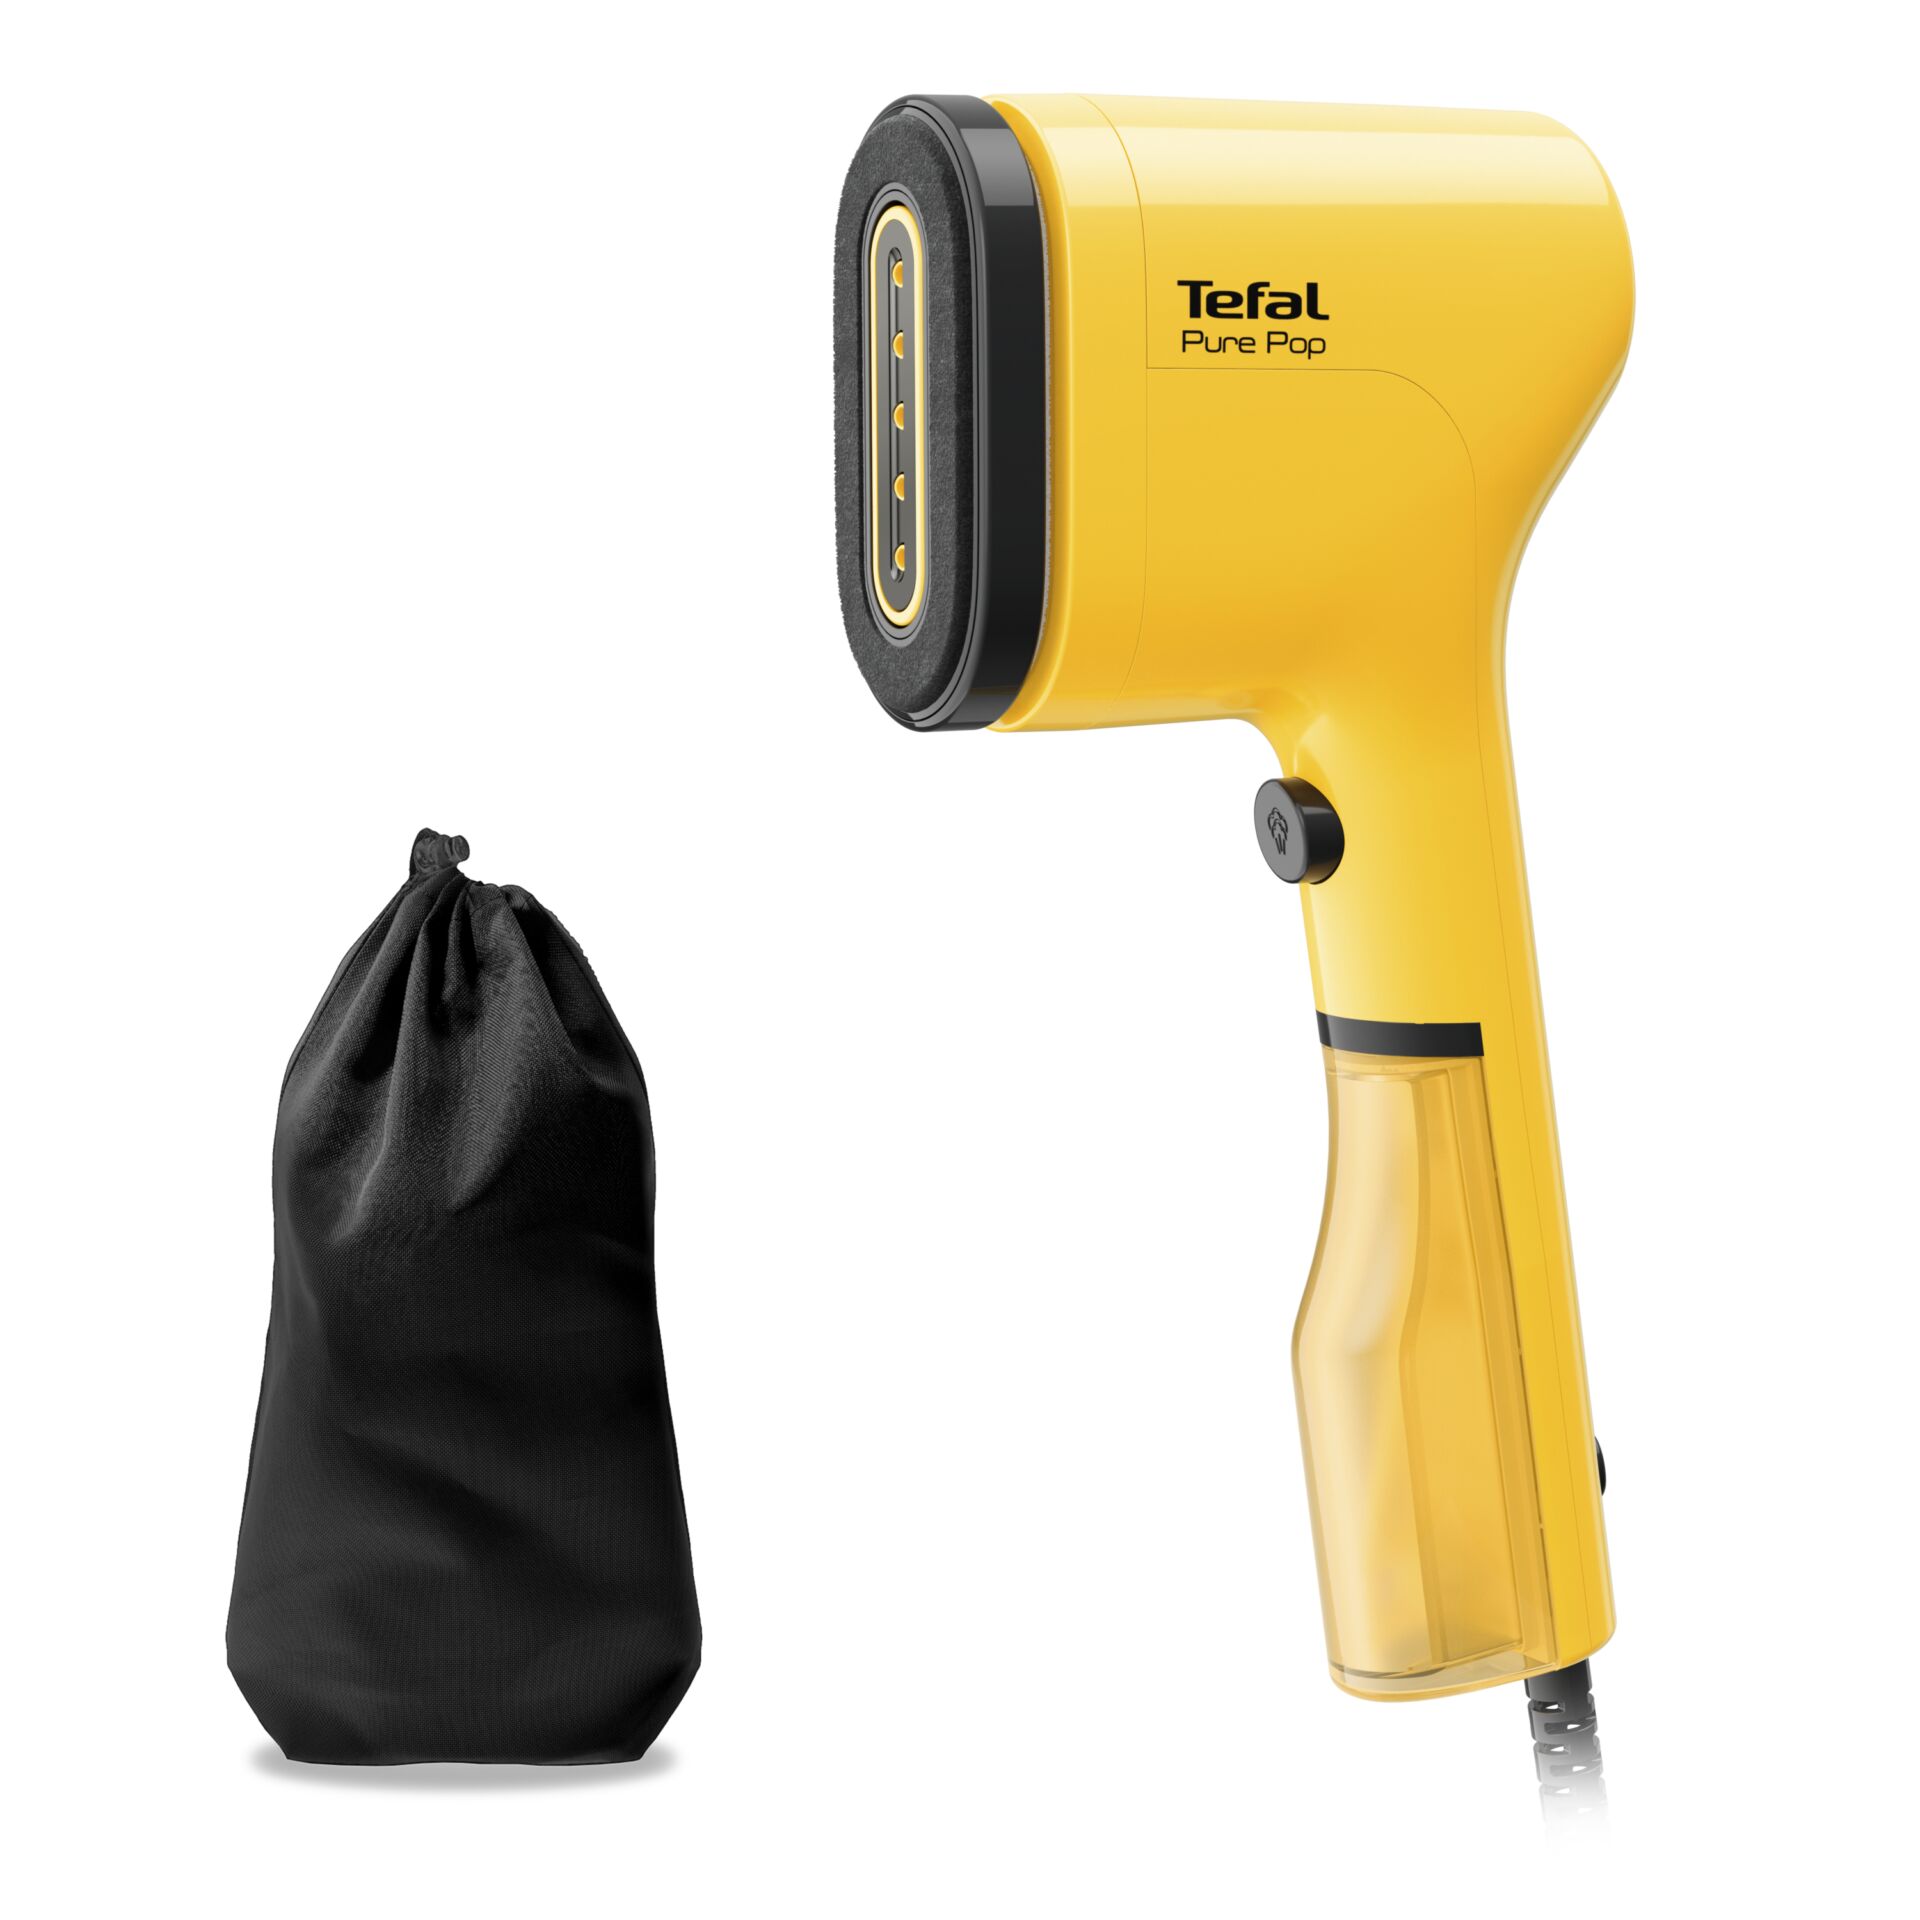 Tefal DT 2026 Pure Pop spazzola a vapore giallo